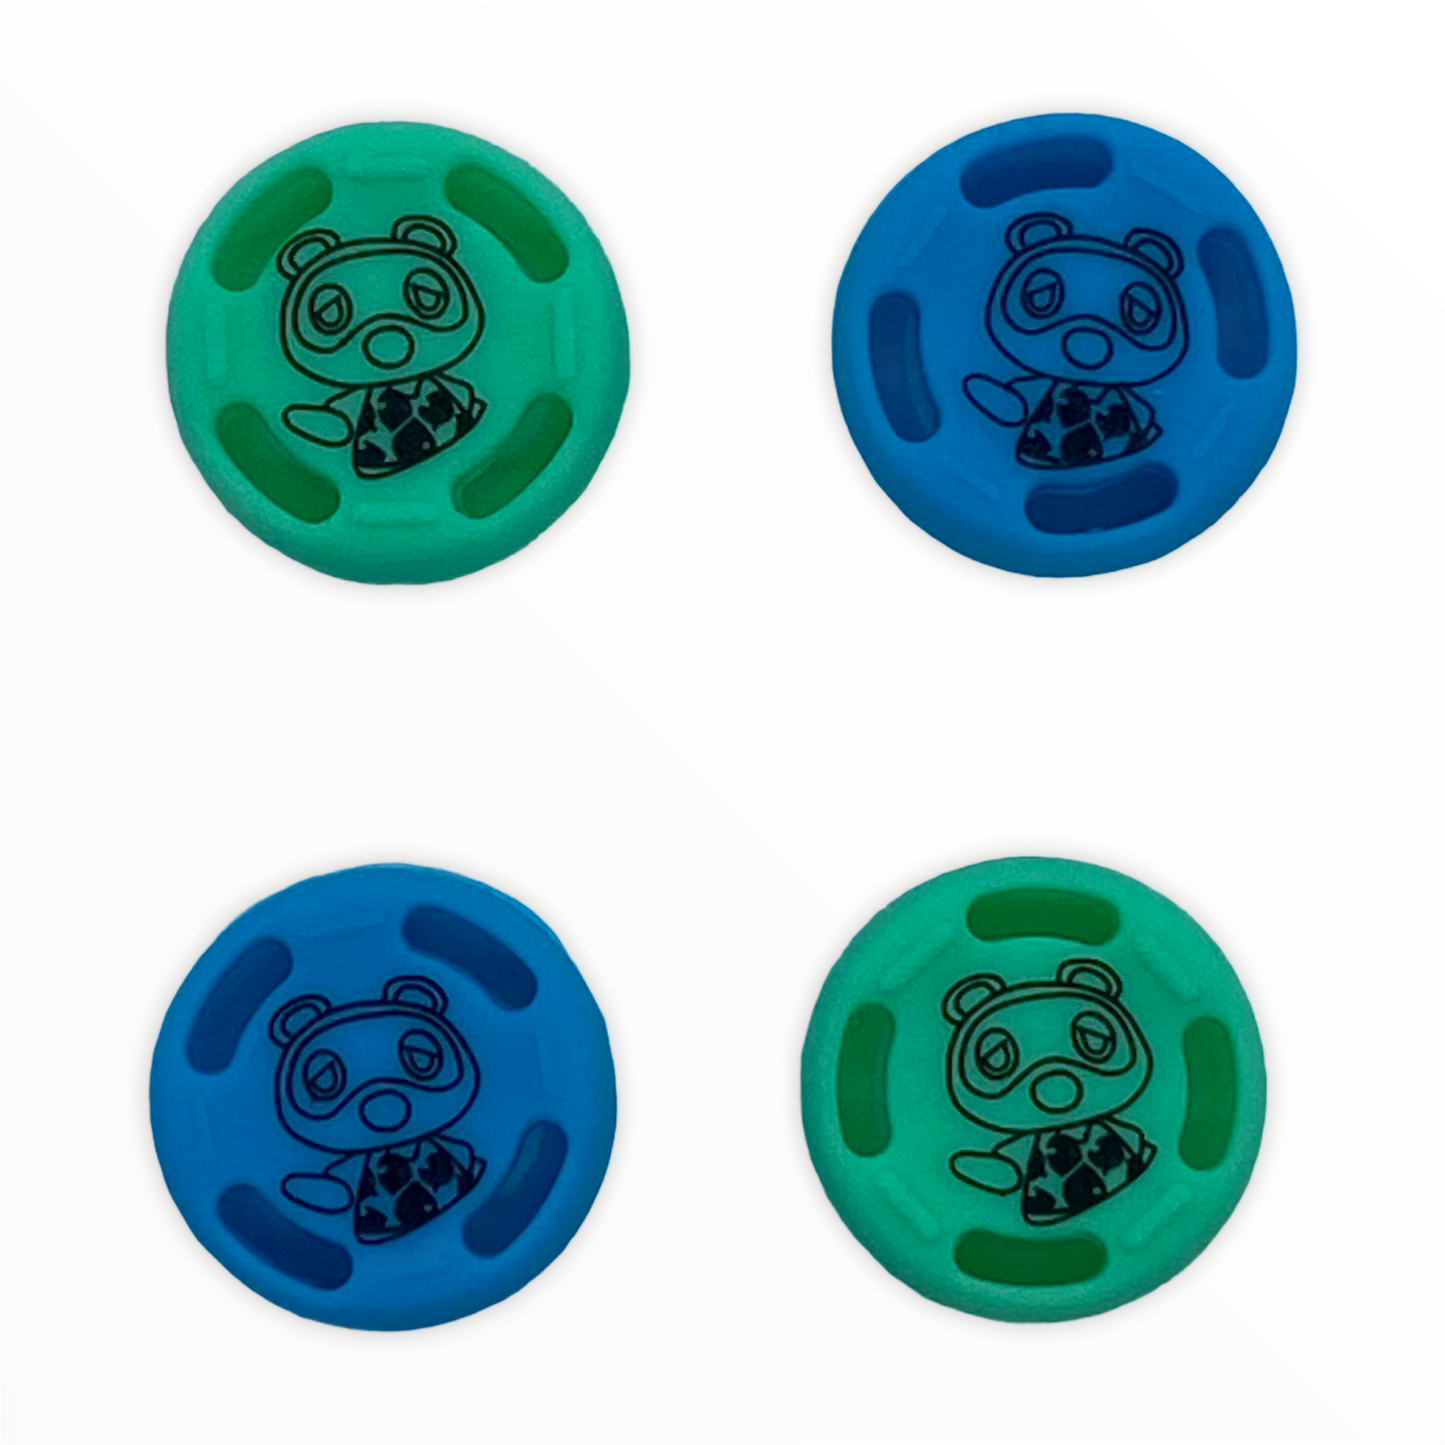 JenDore Green & Blue 4Pcs Raccoon Silicone Thumb Grip Caps for Nintendo Switch